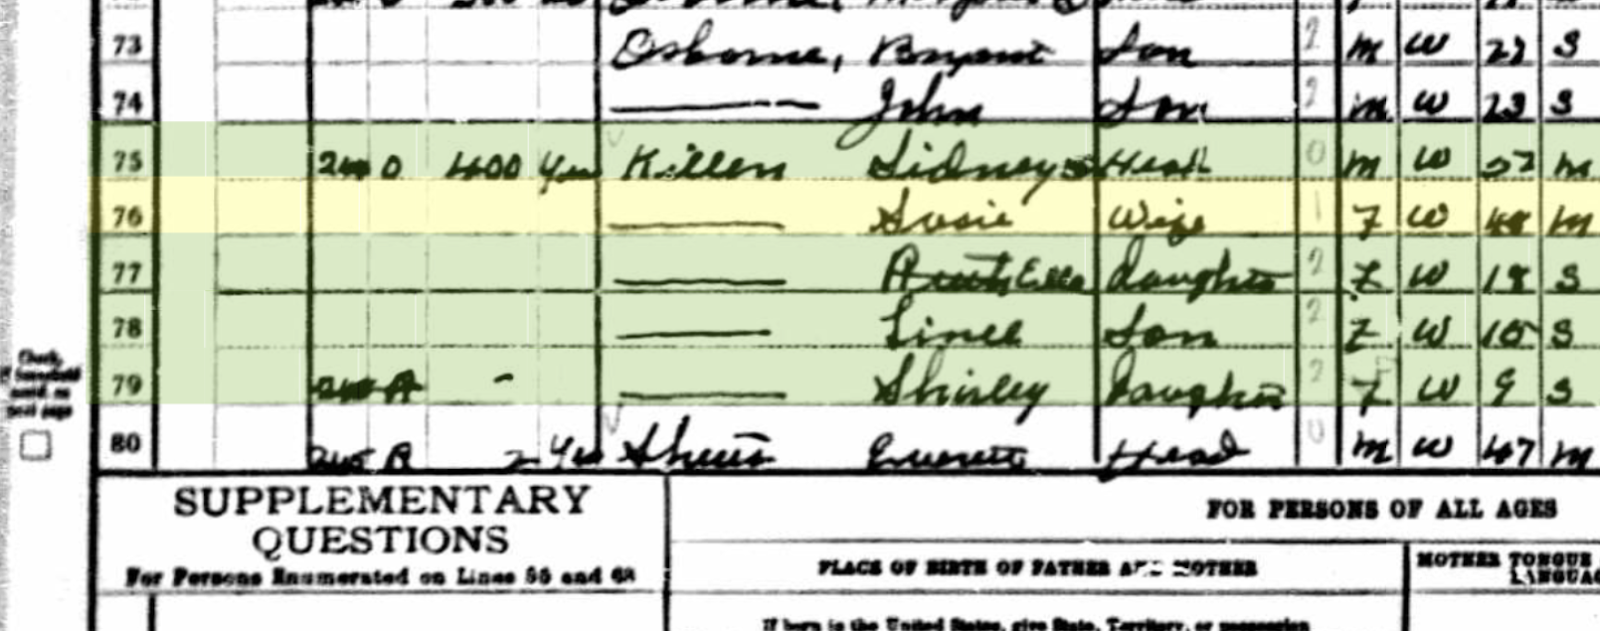 Screenshot of a scanned image of a handwritten census record. The important entry is highlighted in yellow. It is written in cursive, and says "Susie".